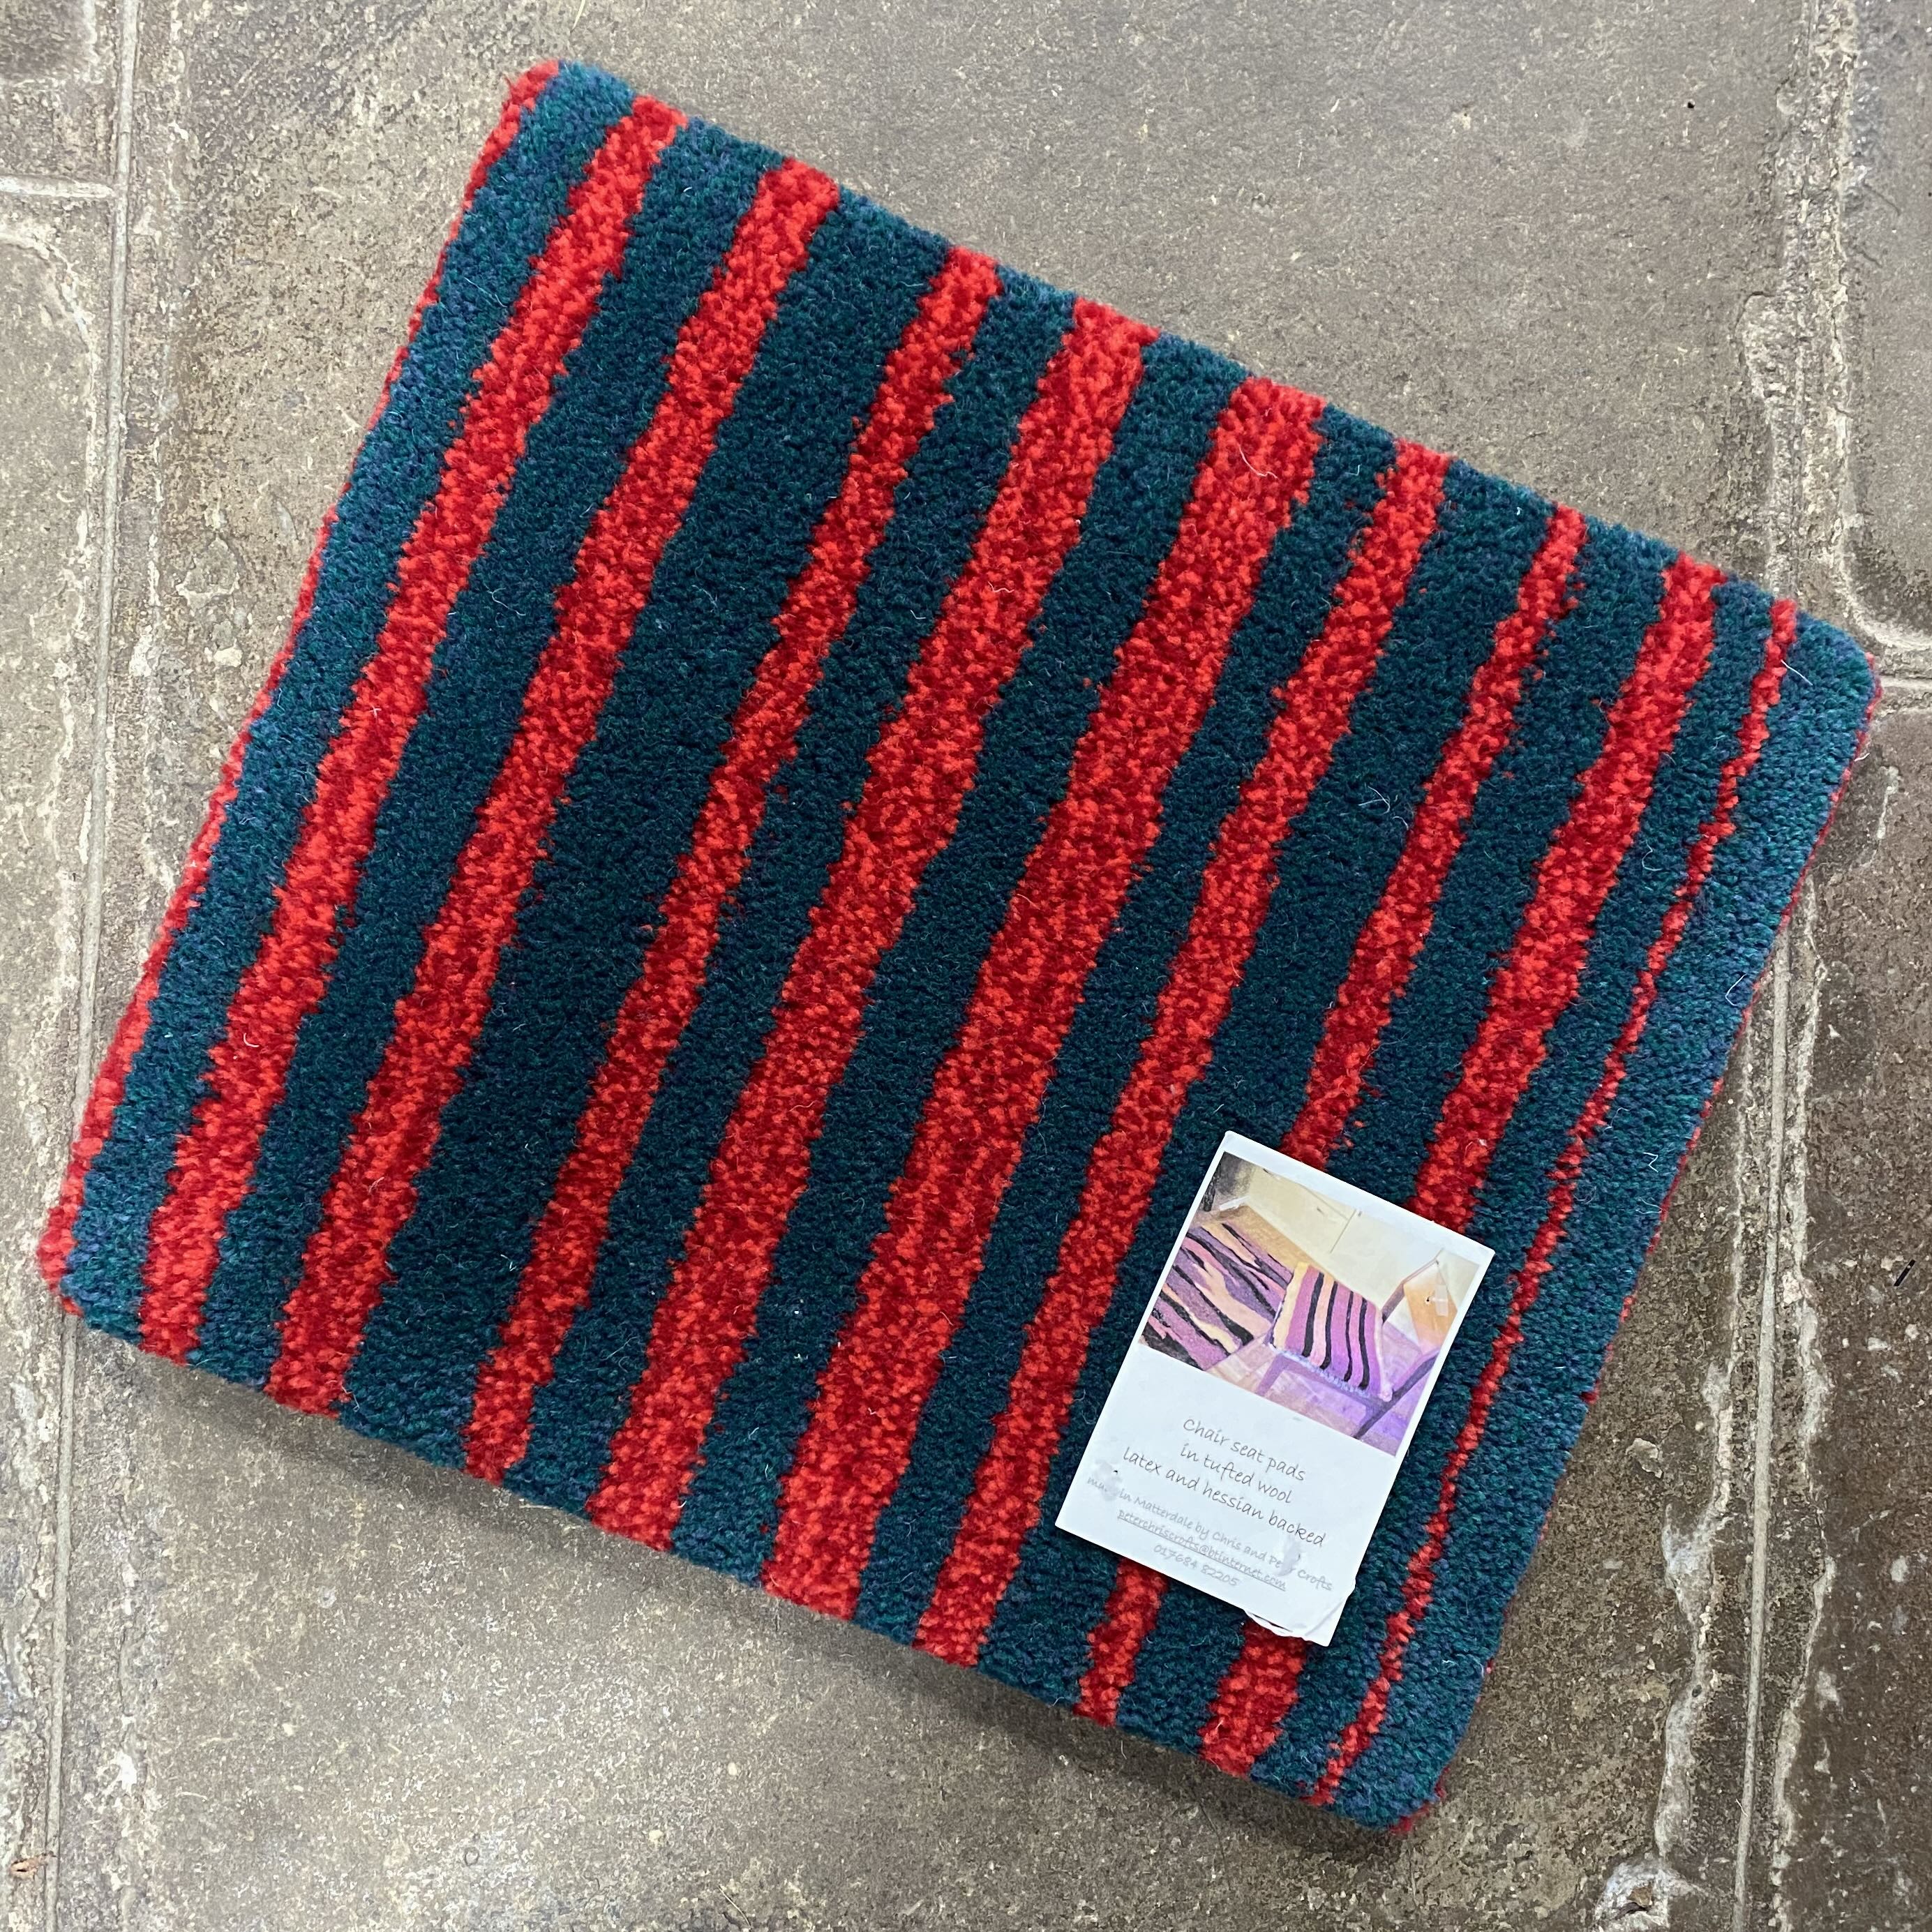 Tufted woollen seat pad - Red/Green Stripes